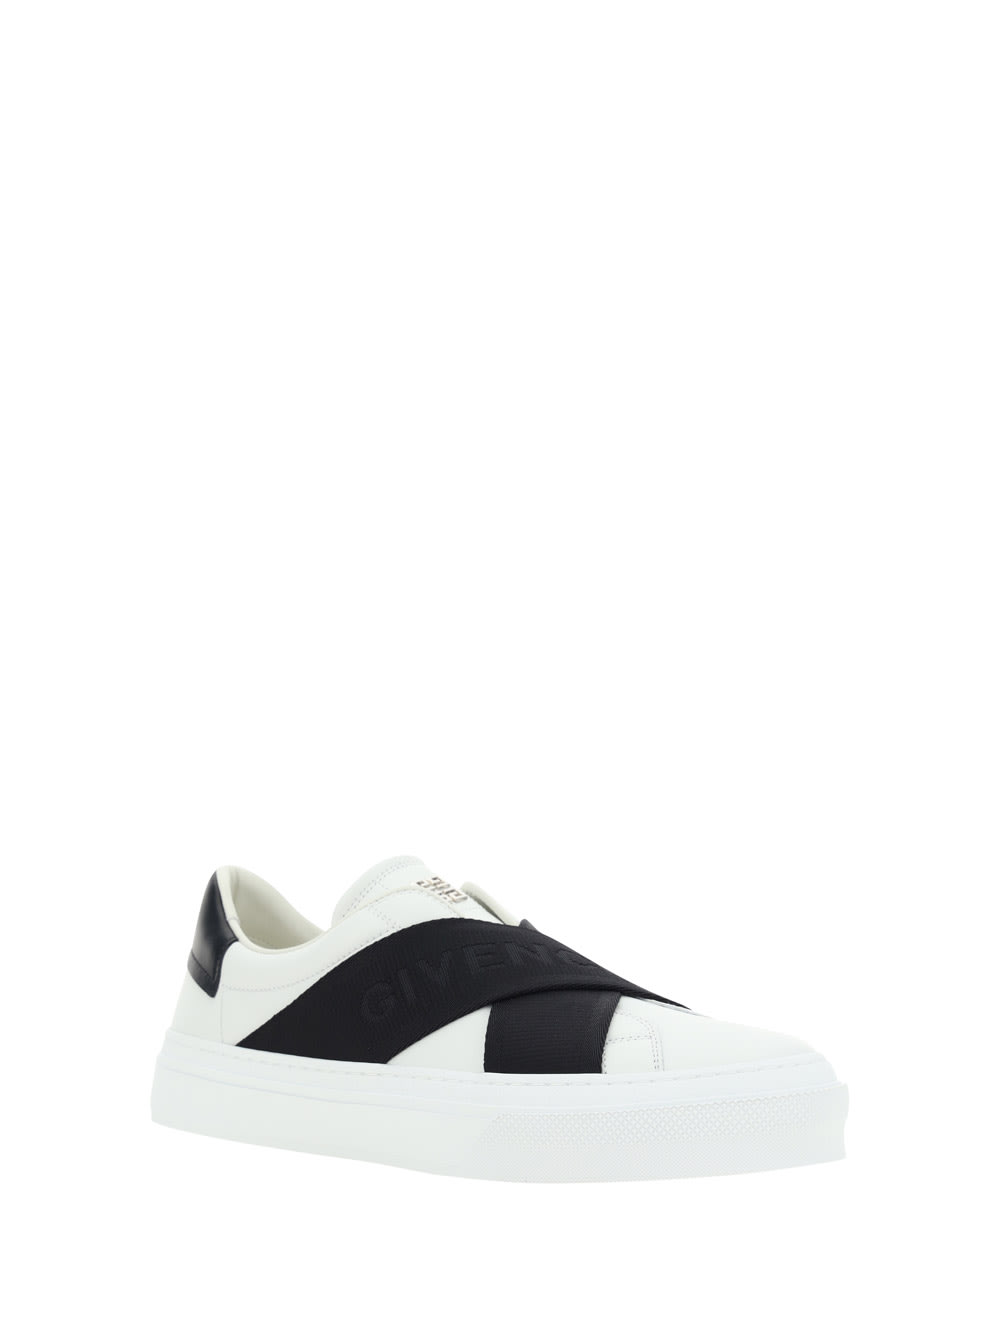 Shop Givenchy Sneakers In Multicolour